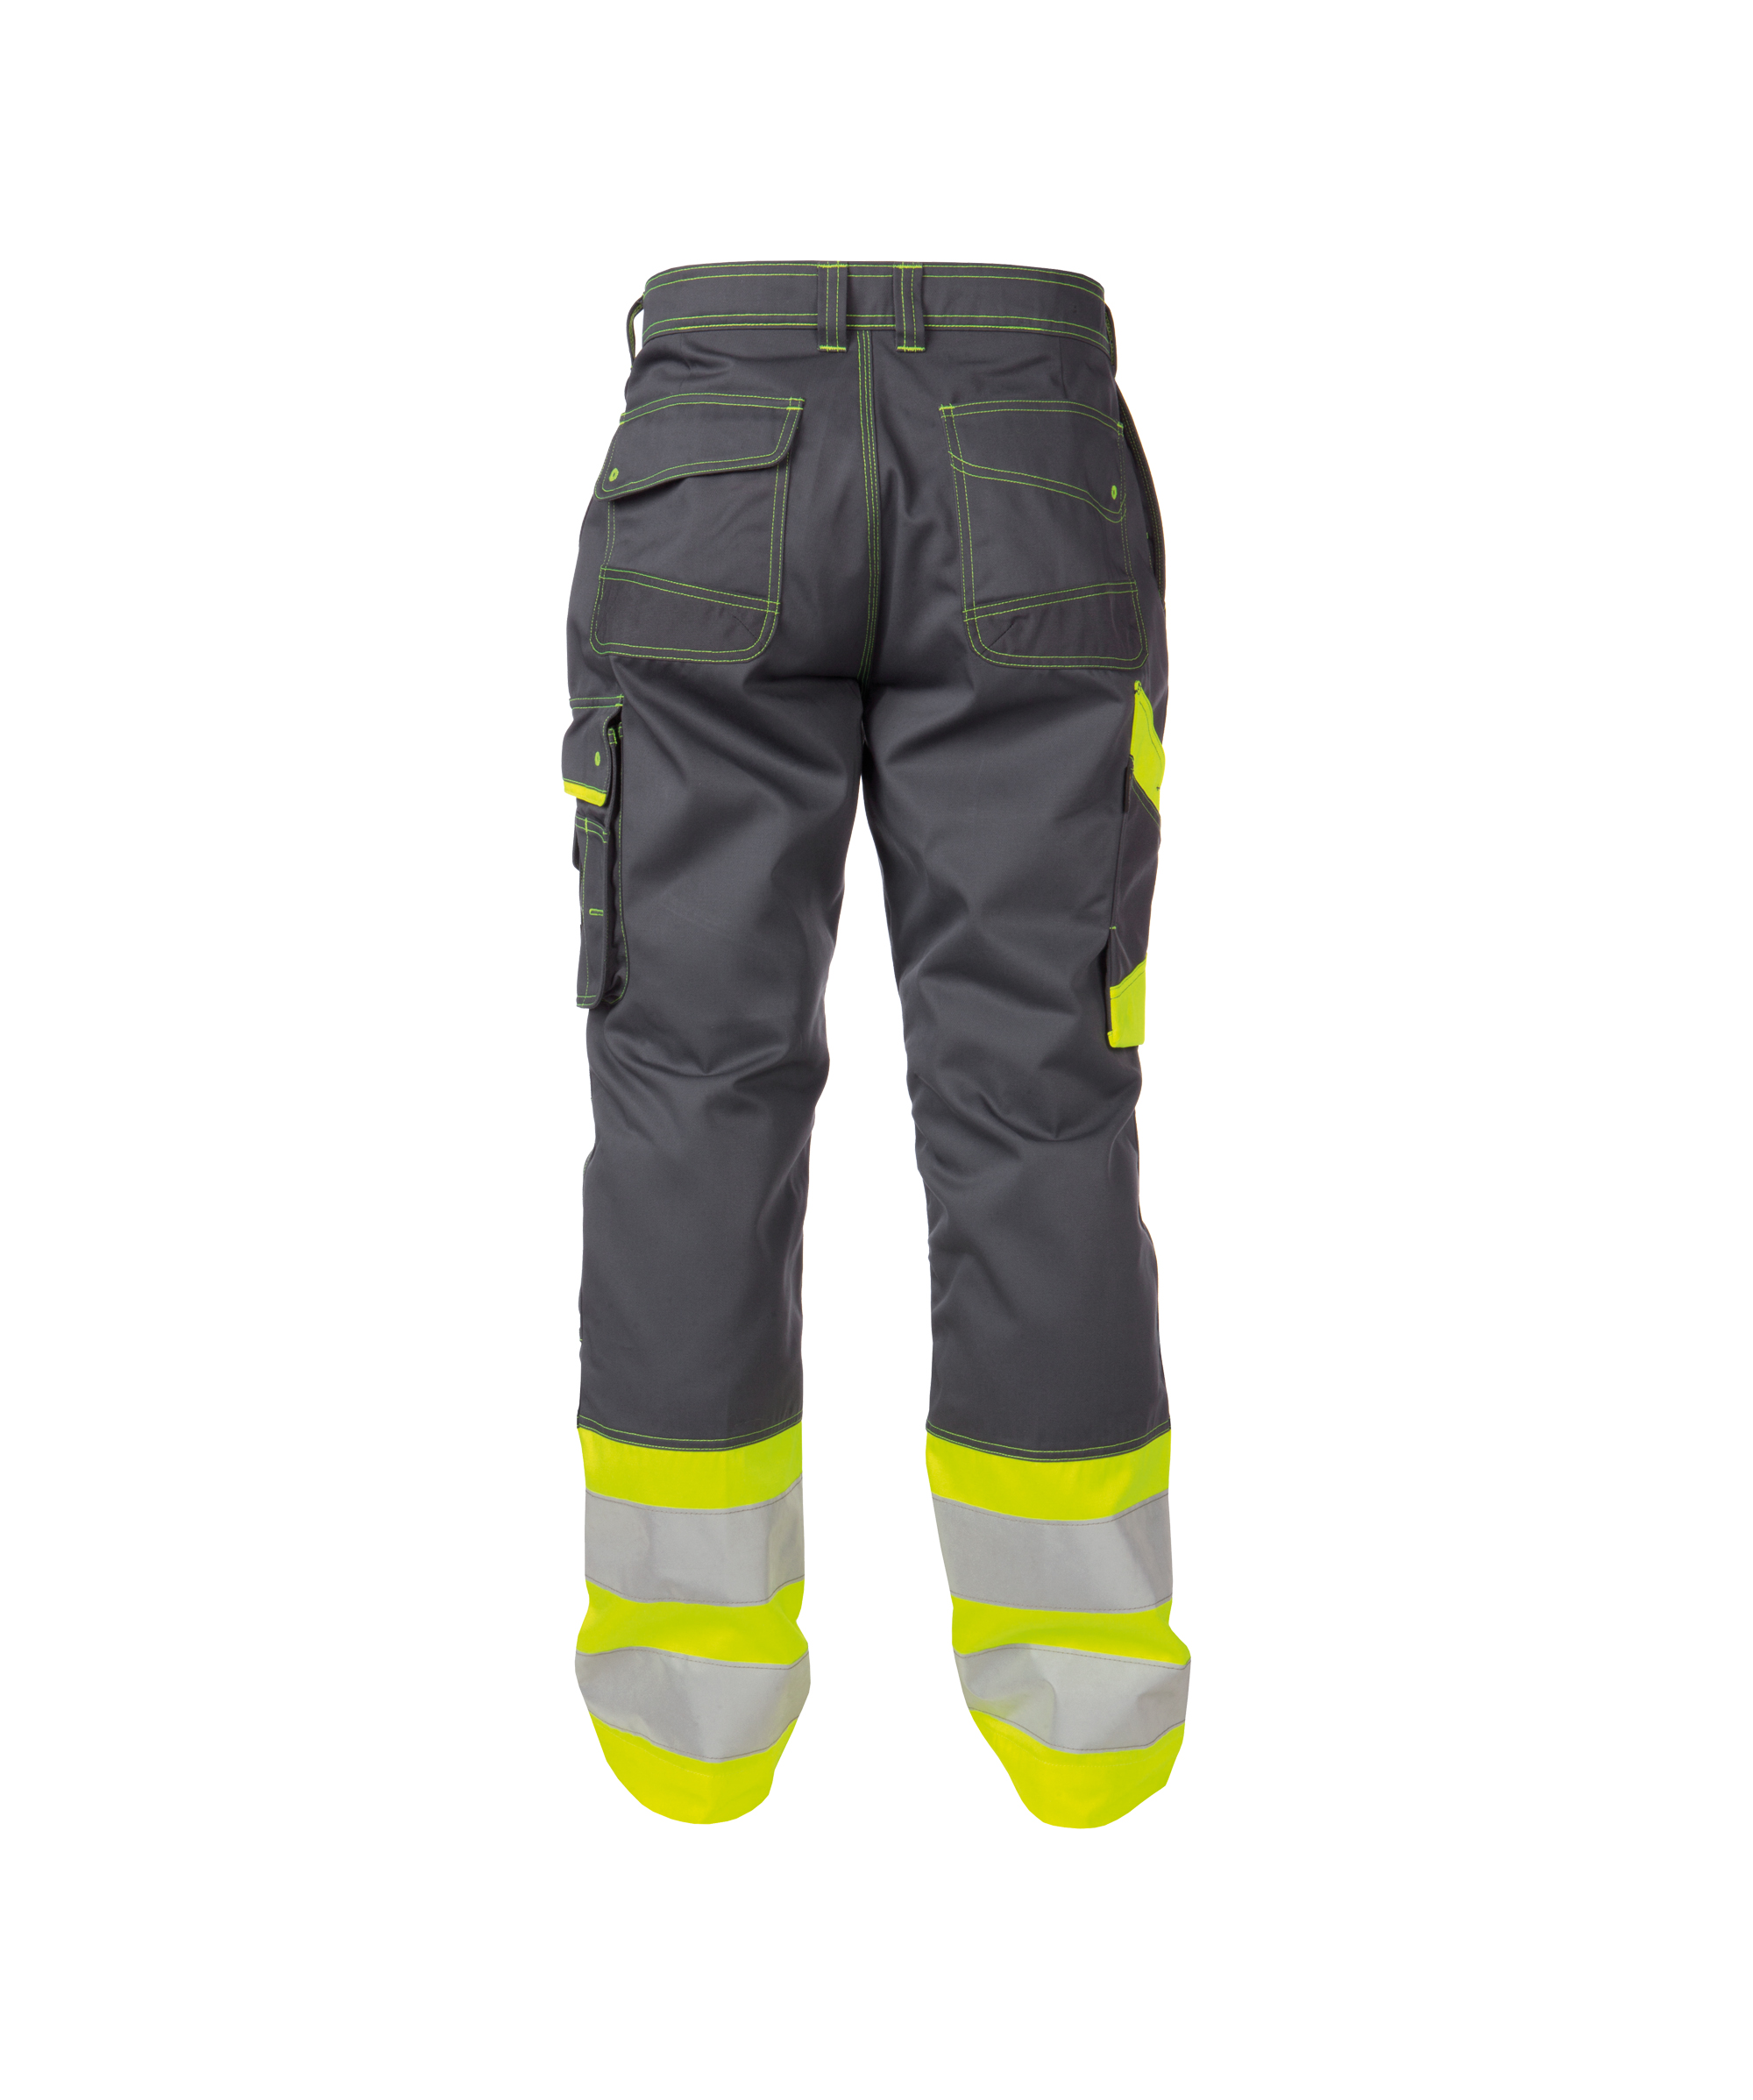 phoenix_high-visibility-work-trousers_cement-grey-fluo-yellow_back.jpg